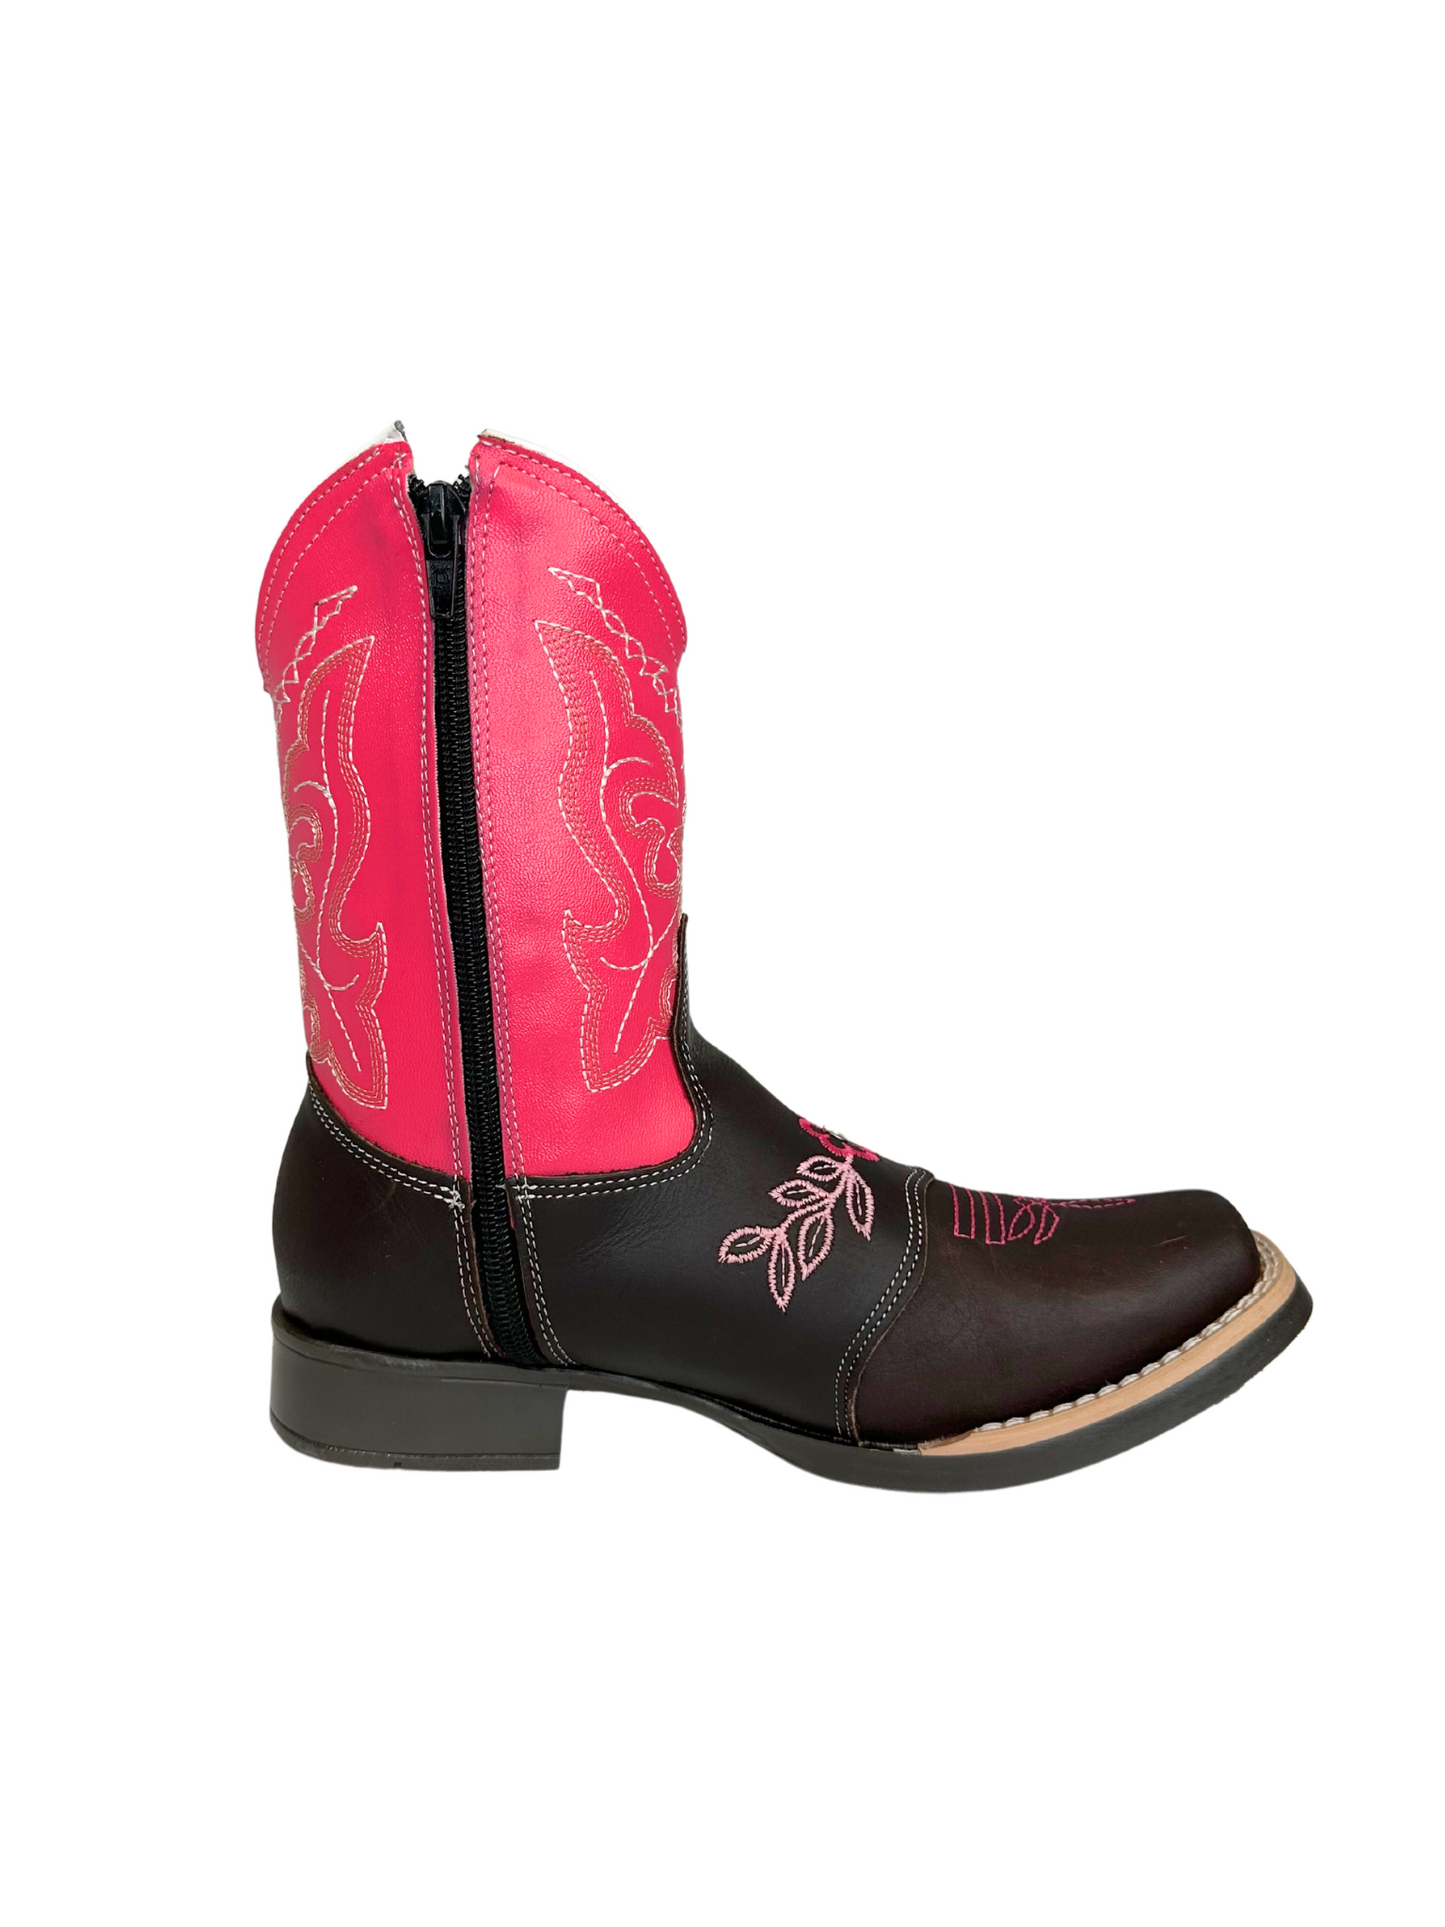 Chaparral Girl's Brown & Pink Stitched Boot